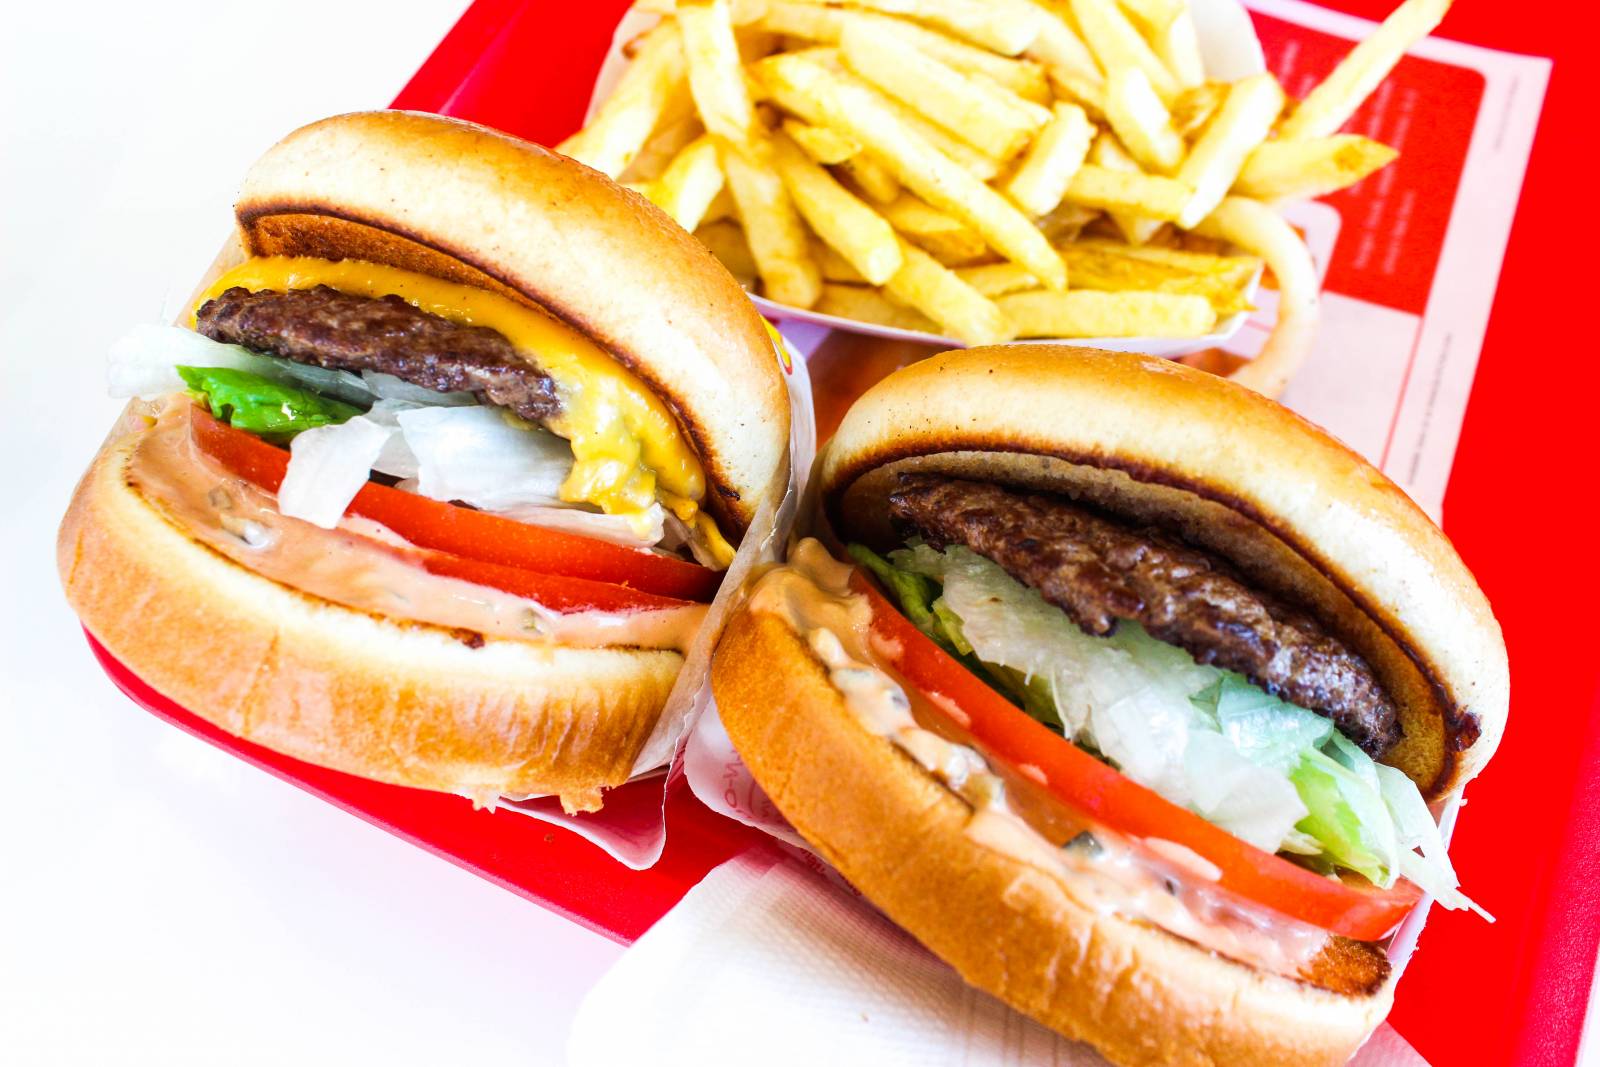 Best burgers in the west? In-N-Out Burger is the winner